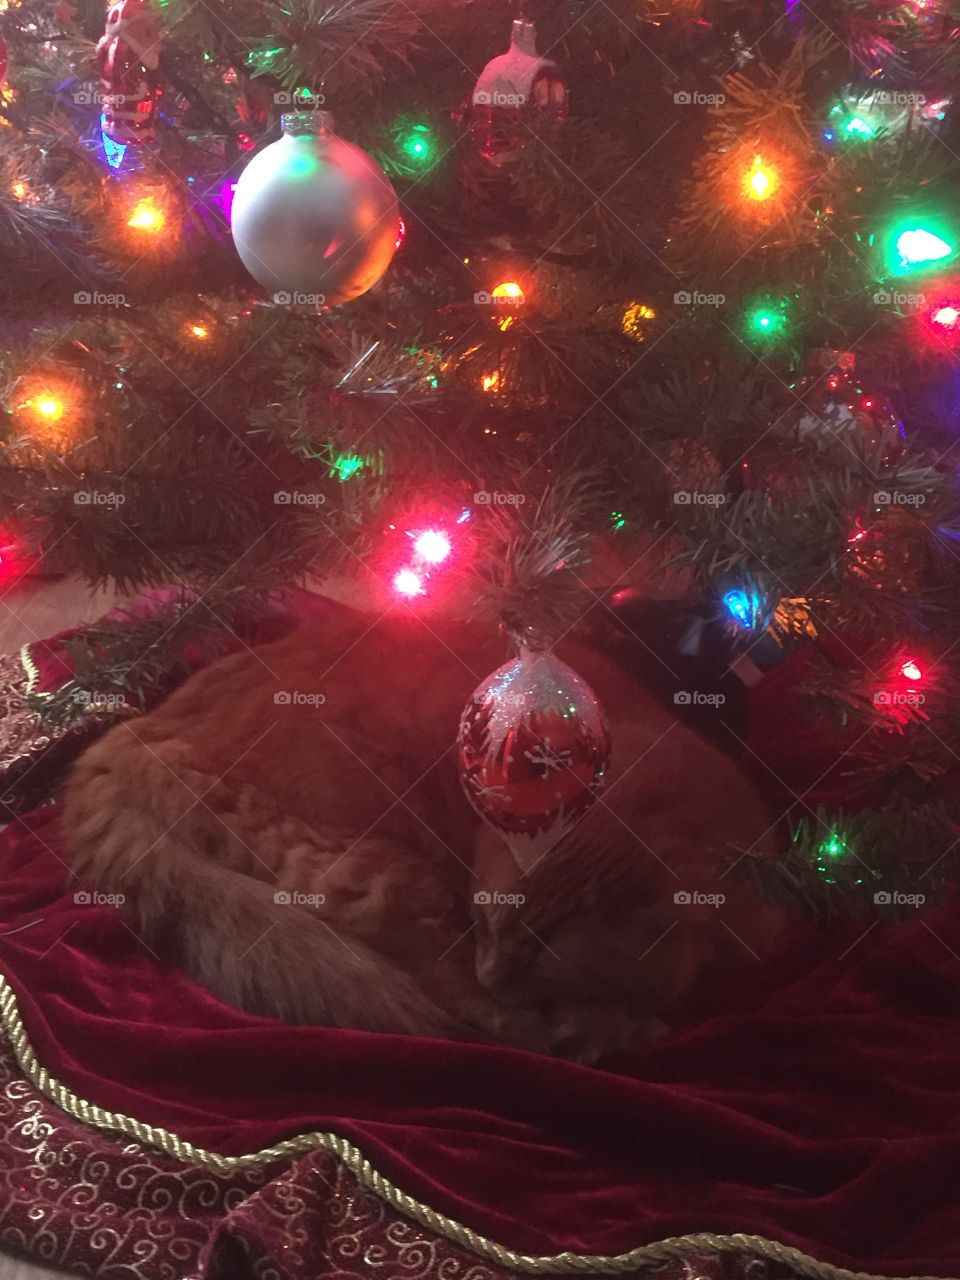 Napping under the tree